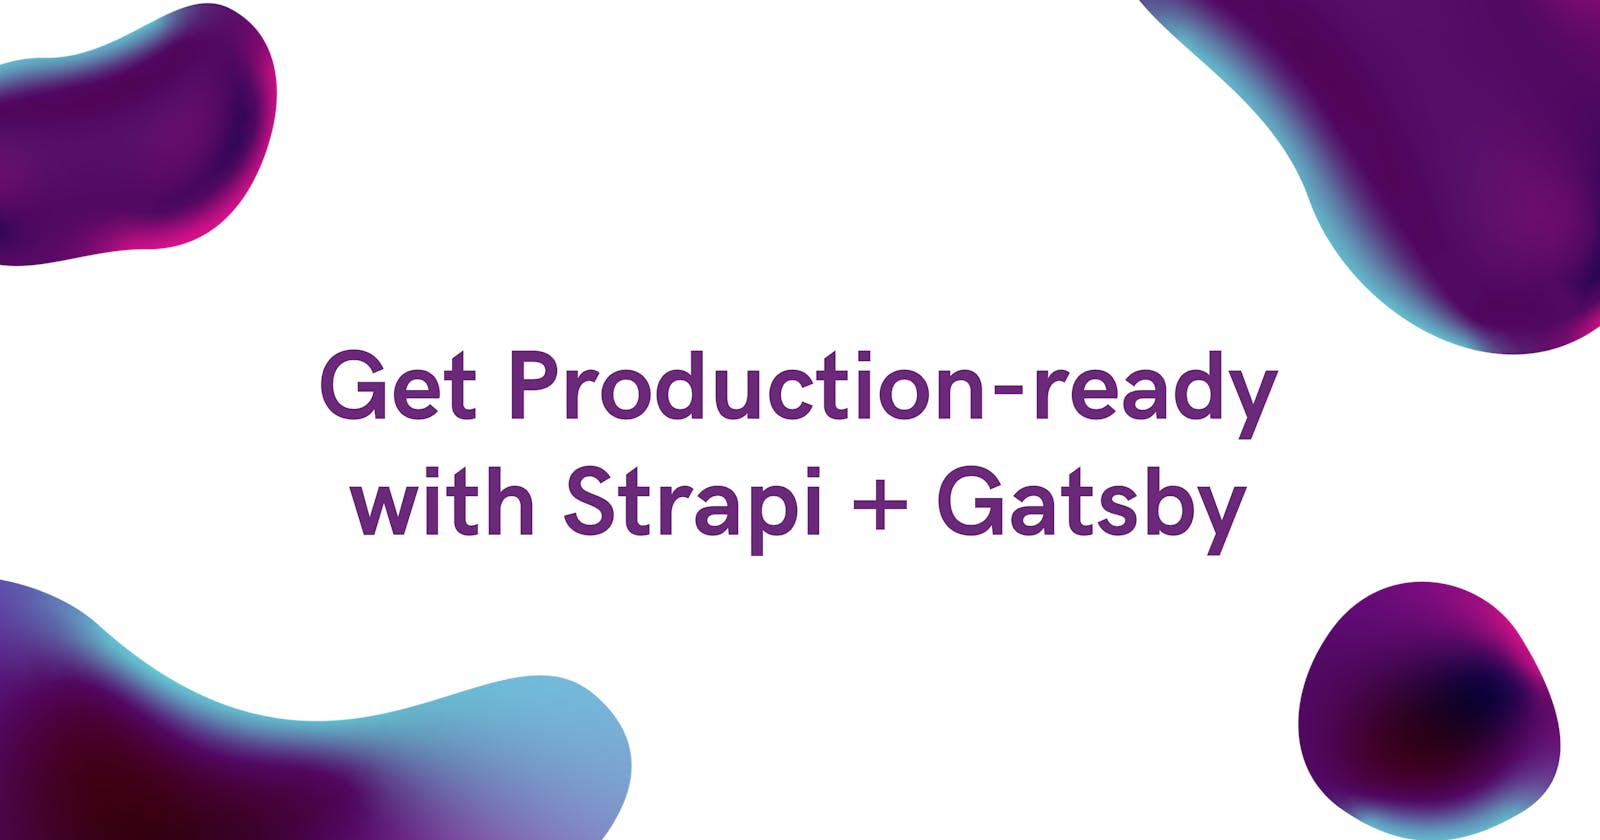 Get Production-ready with Strapi + Gatsby